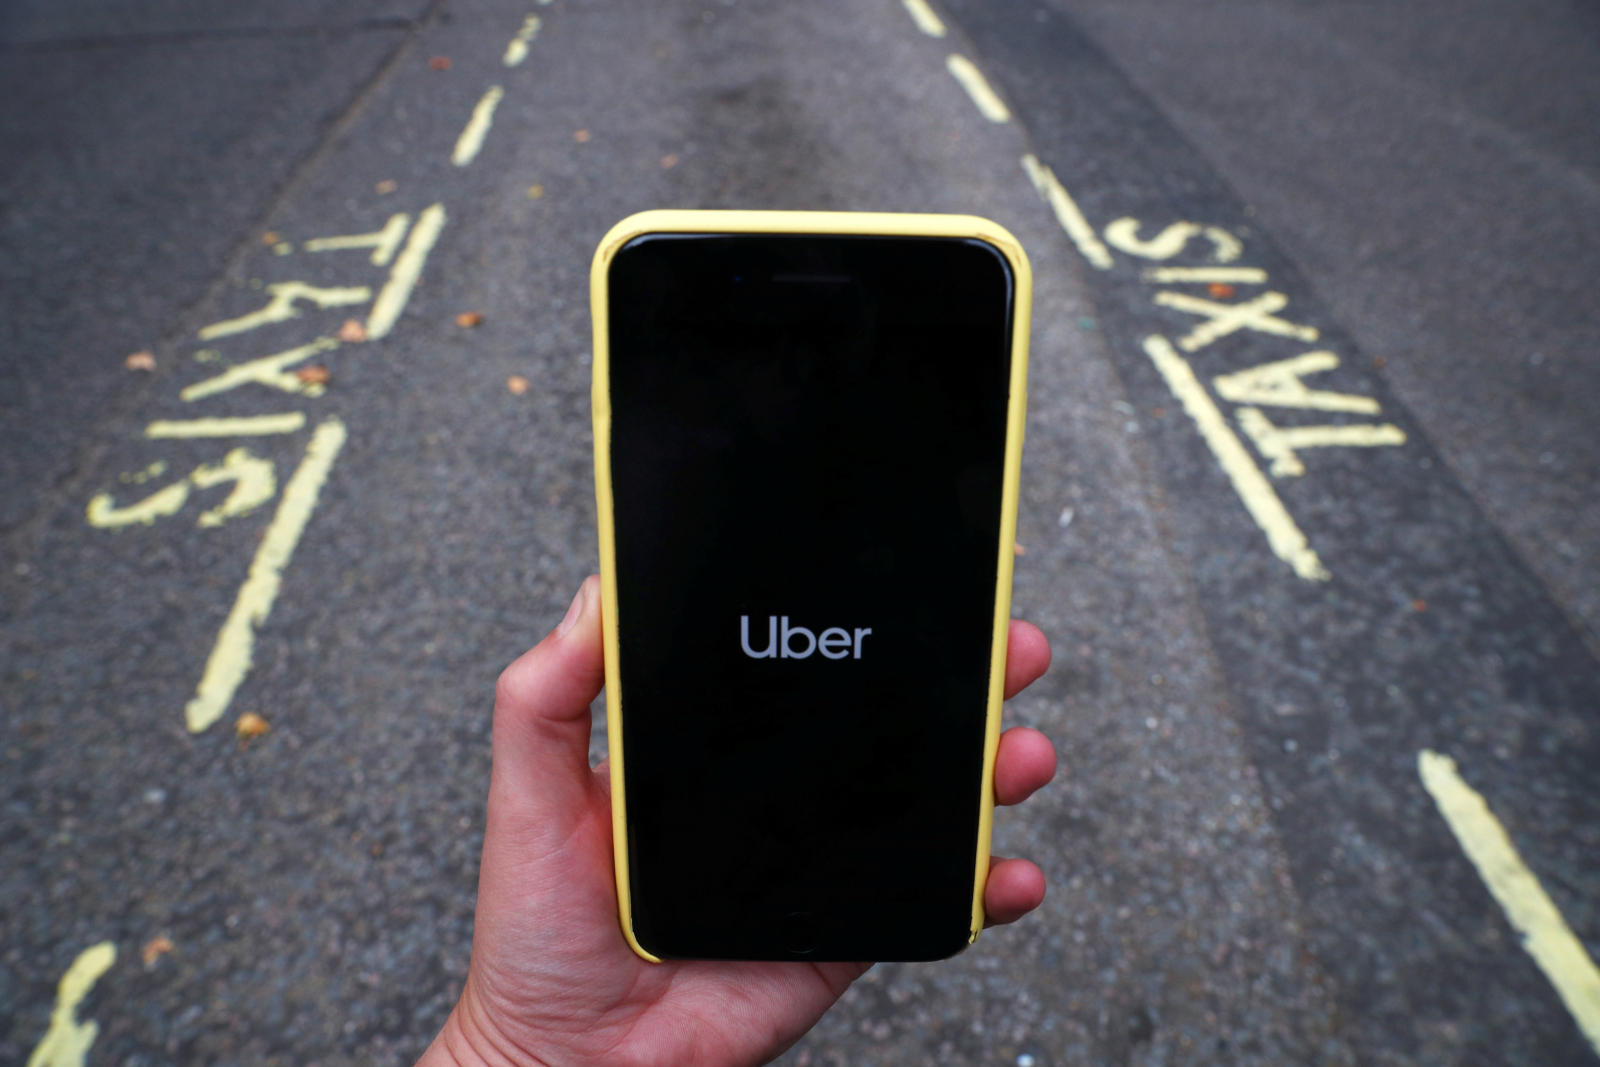 Uber IPO valued at $120 billion, worth more than Ford and General Motors - report